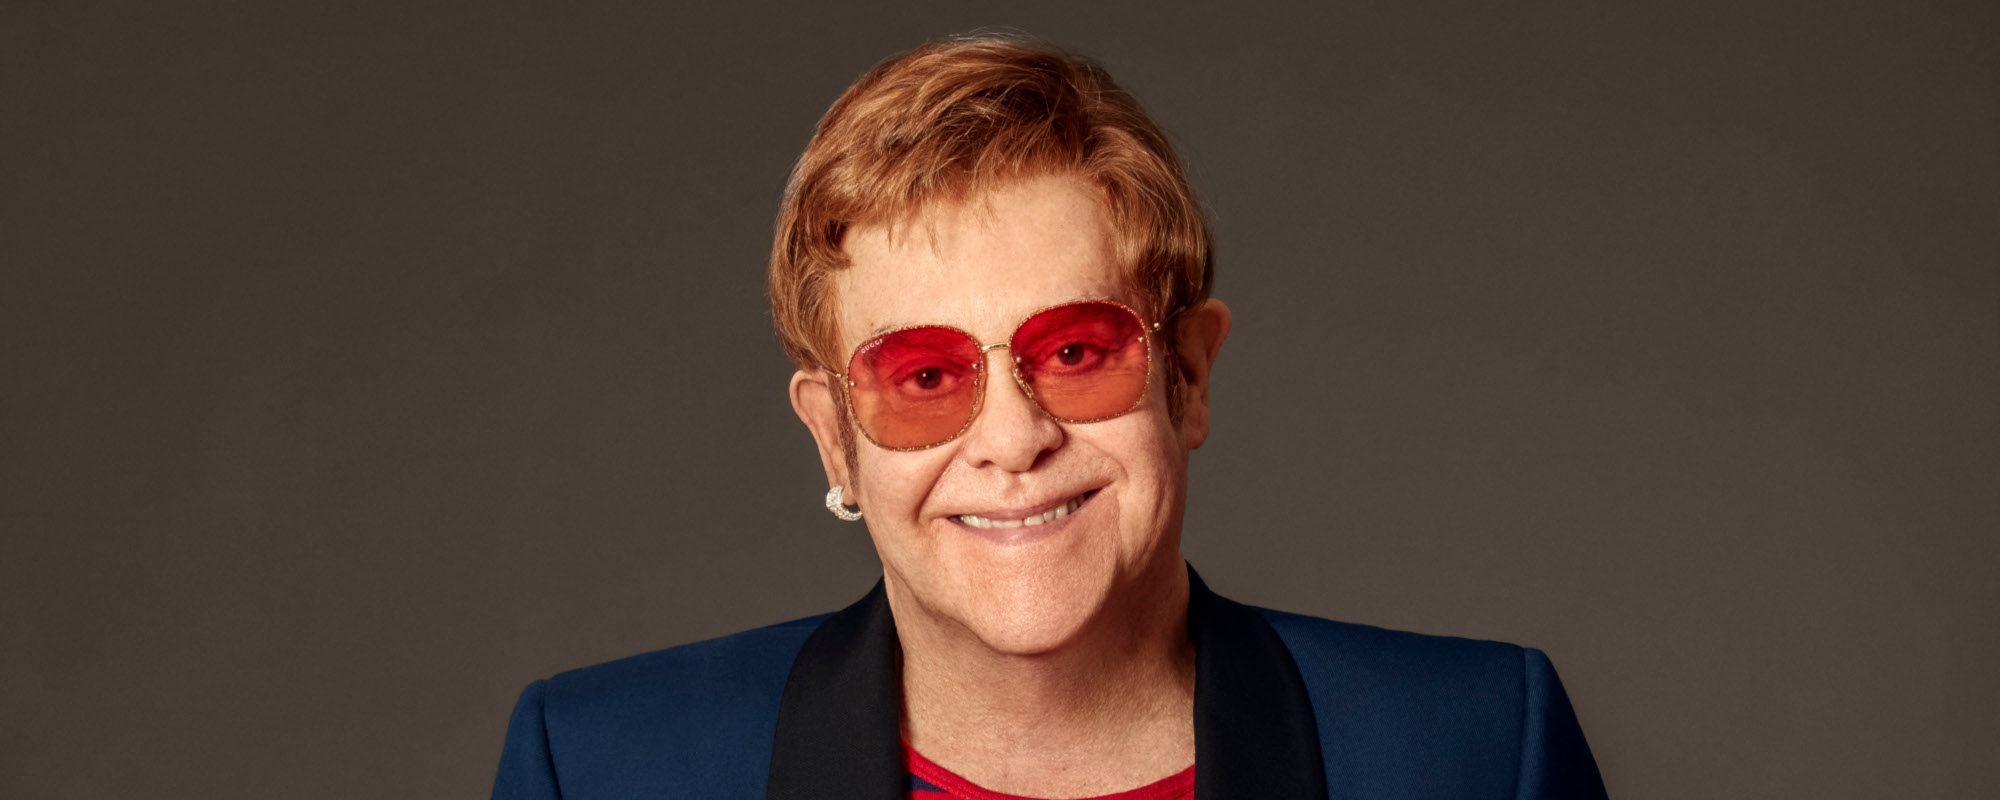 Elton John and Charlie Puth Debut New Single, “After All”